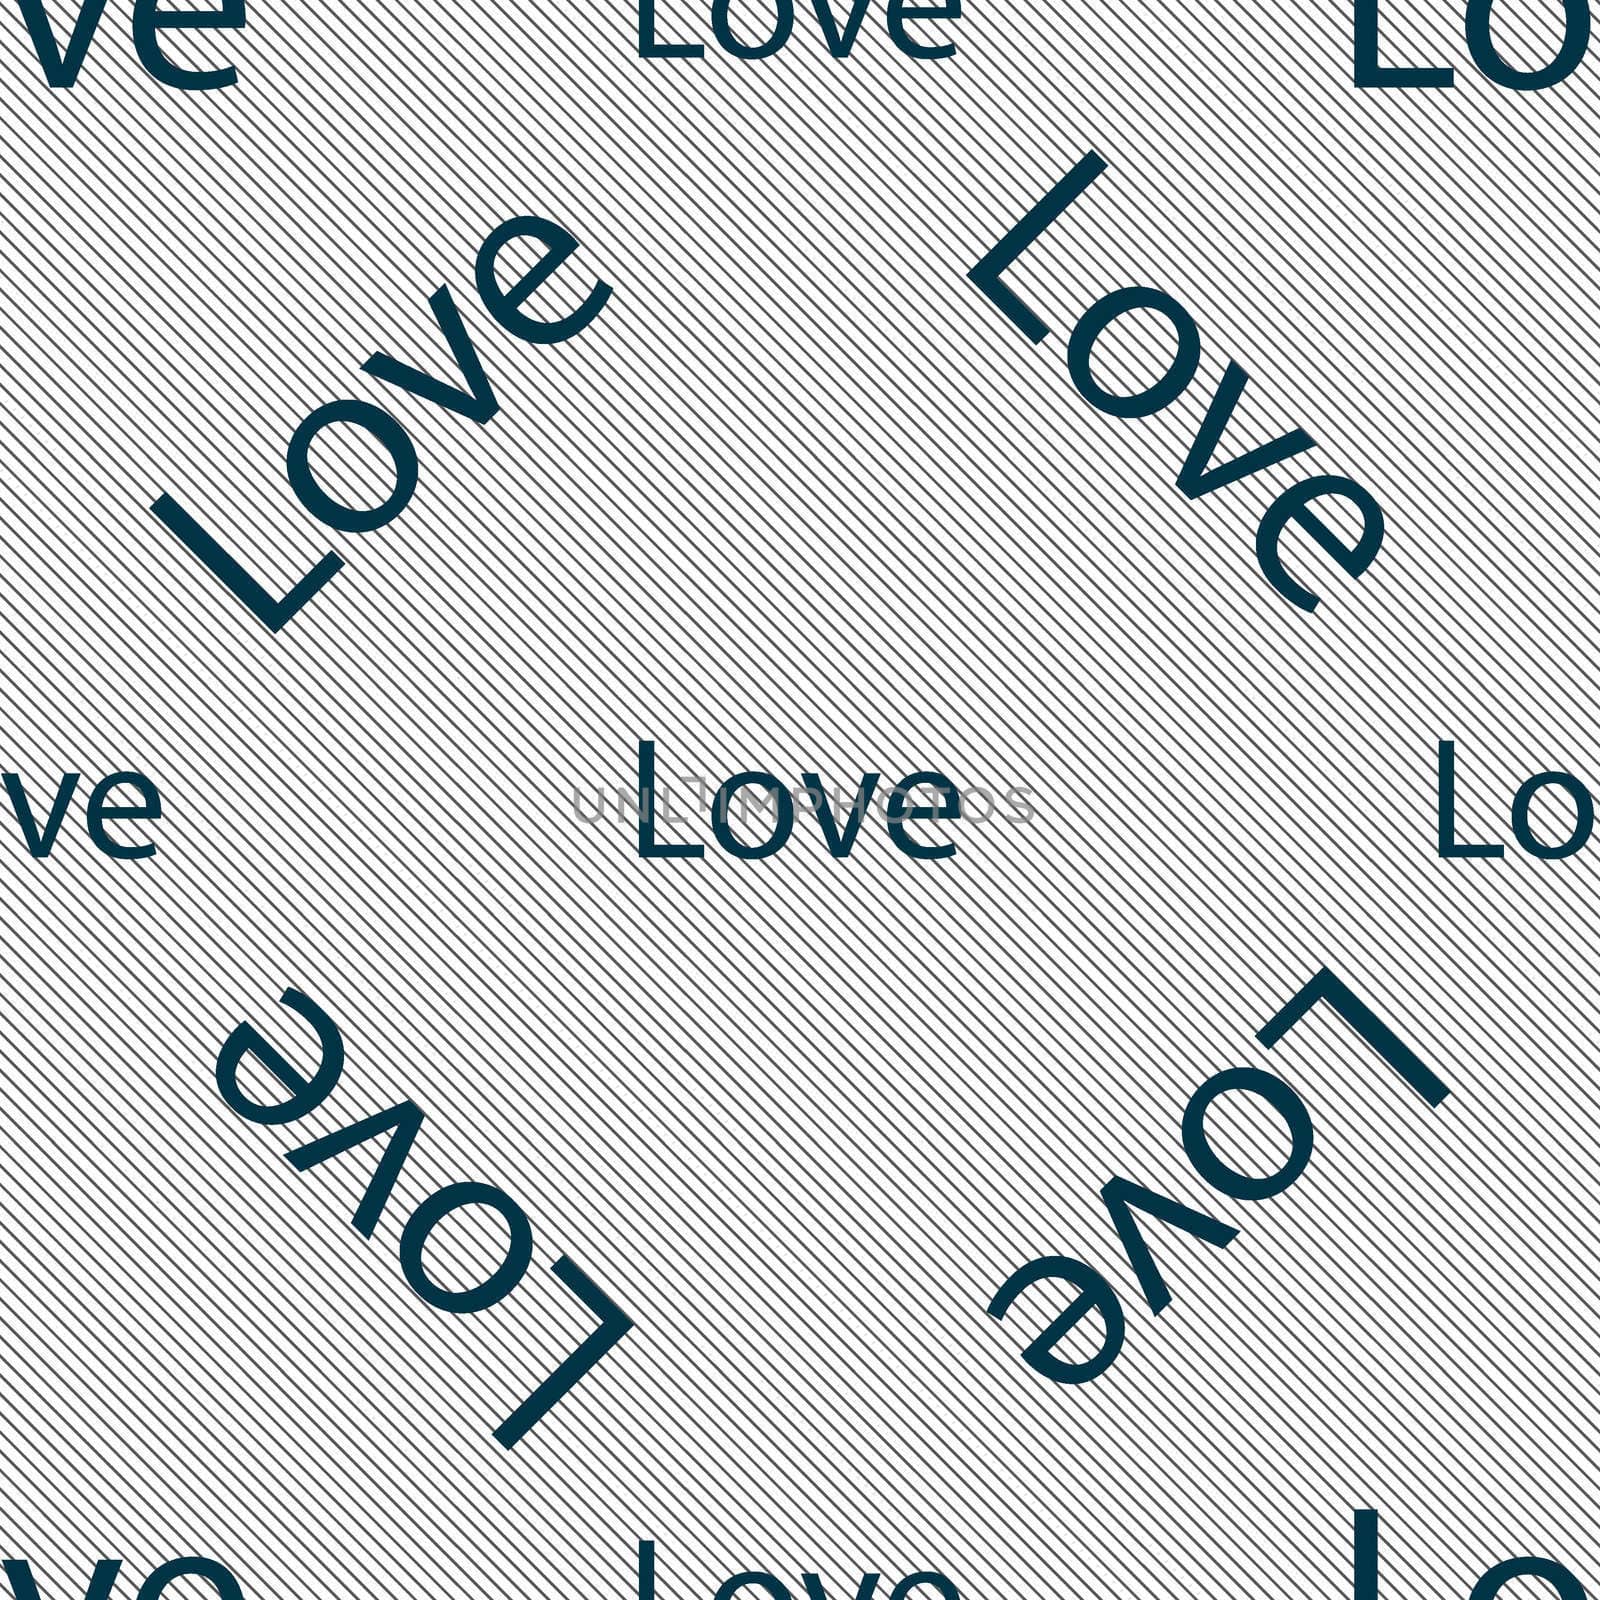 Love you sign icon. Valentines day symbol. Seamless pattern with geometric texture. illustration